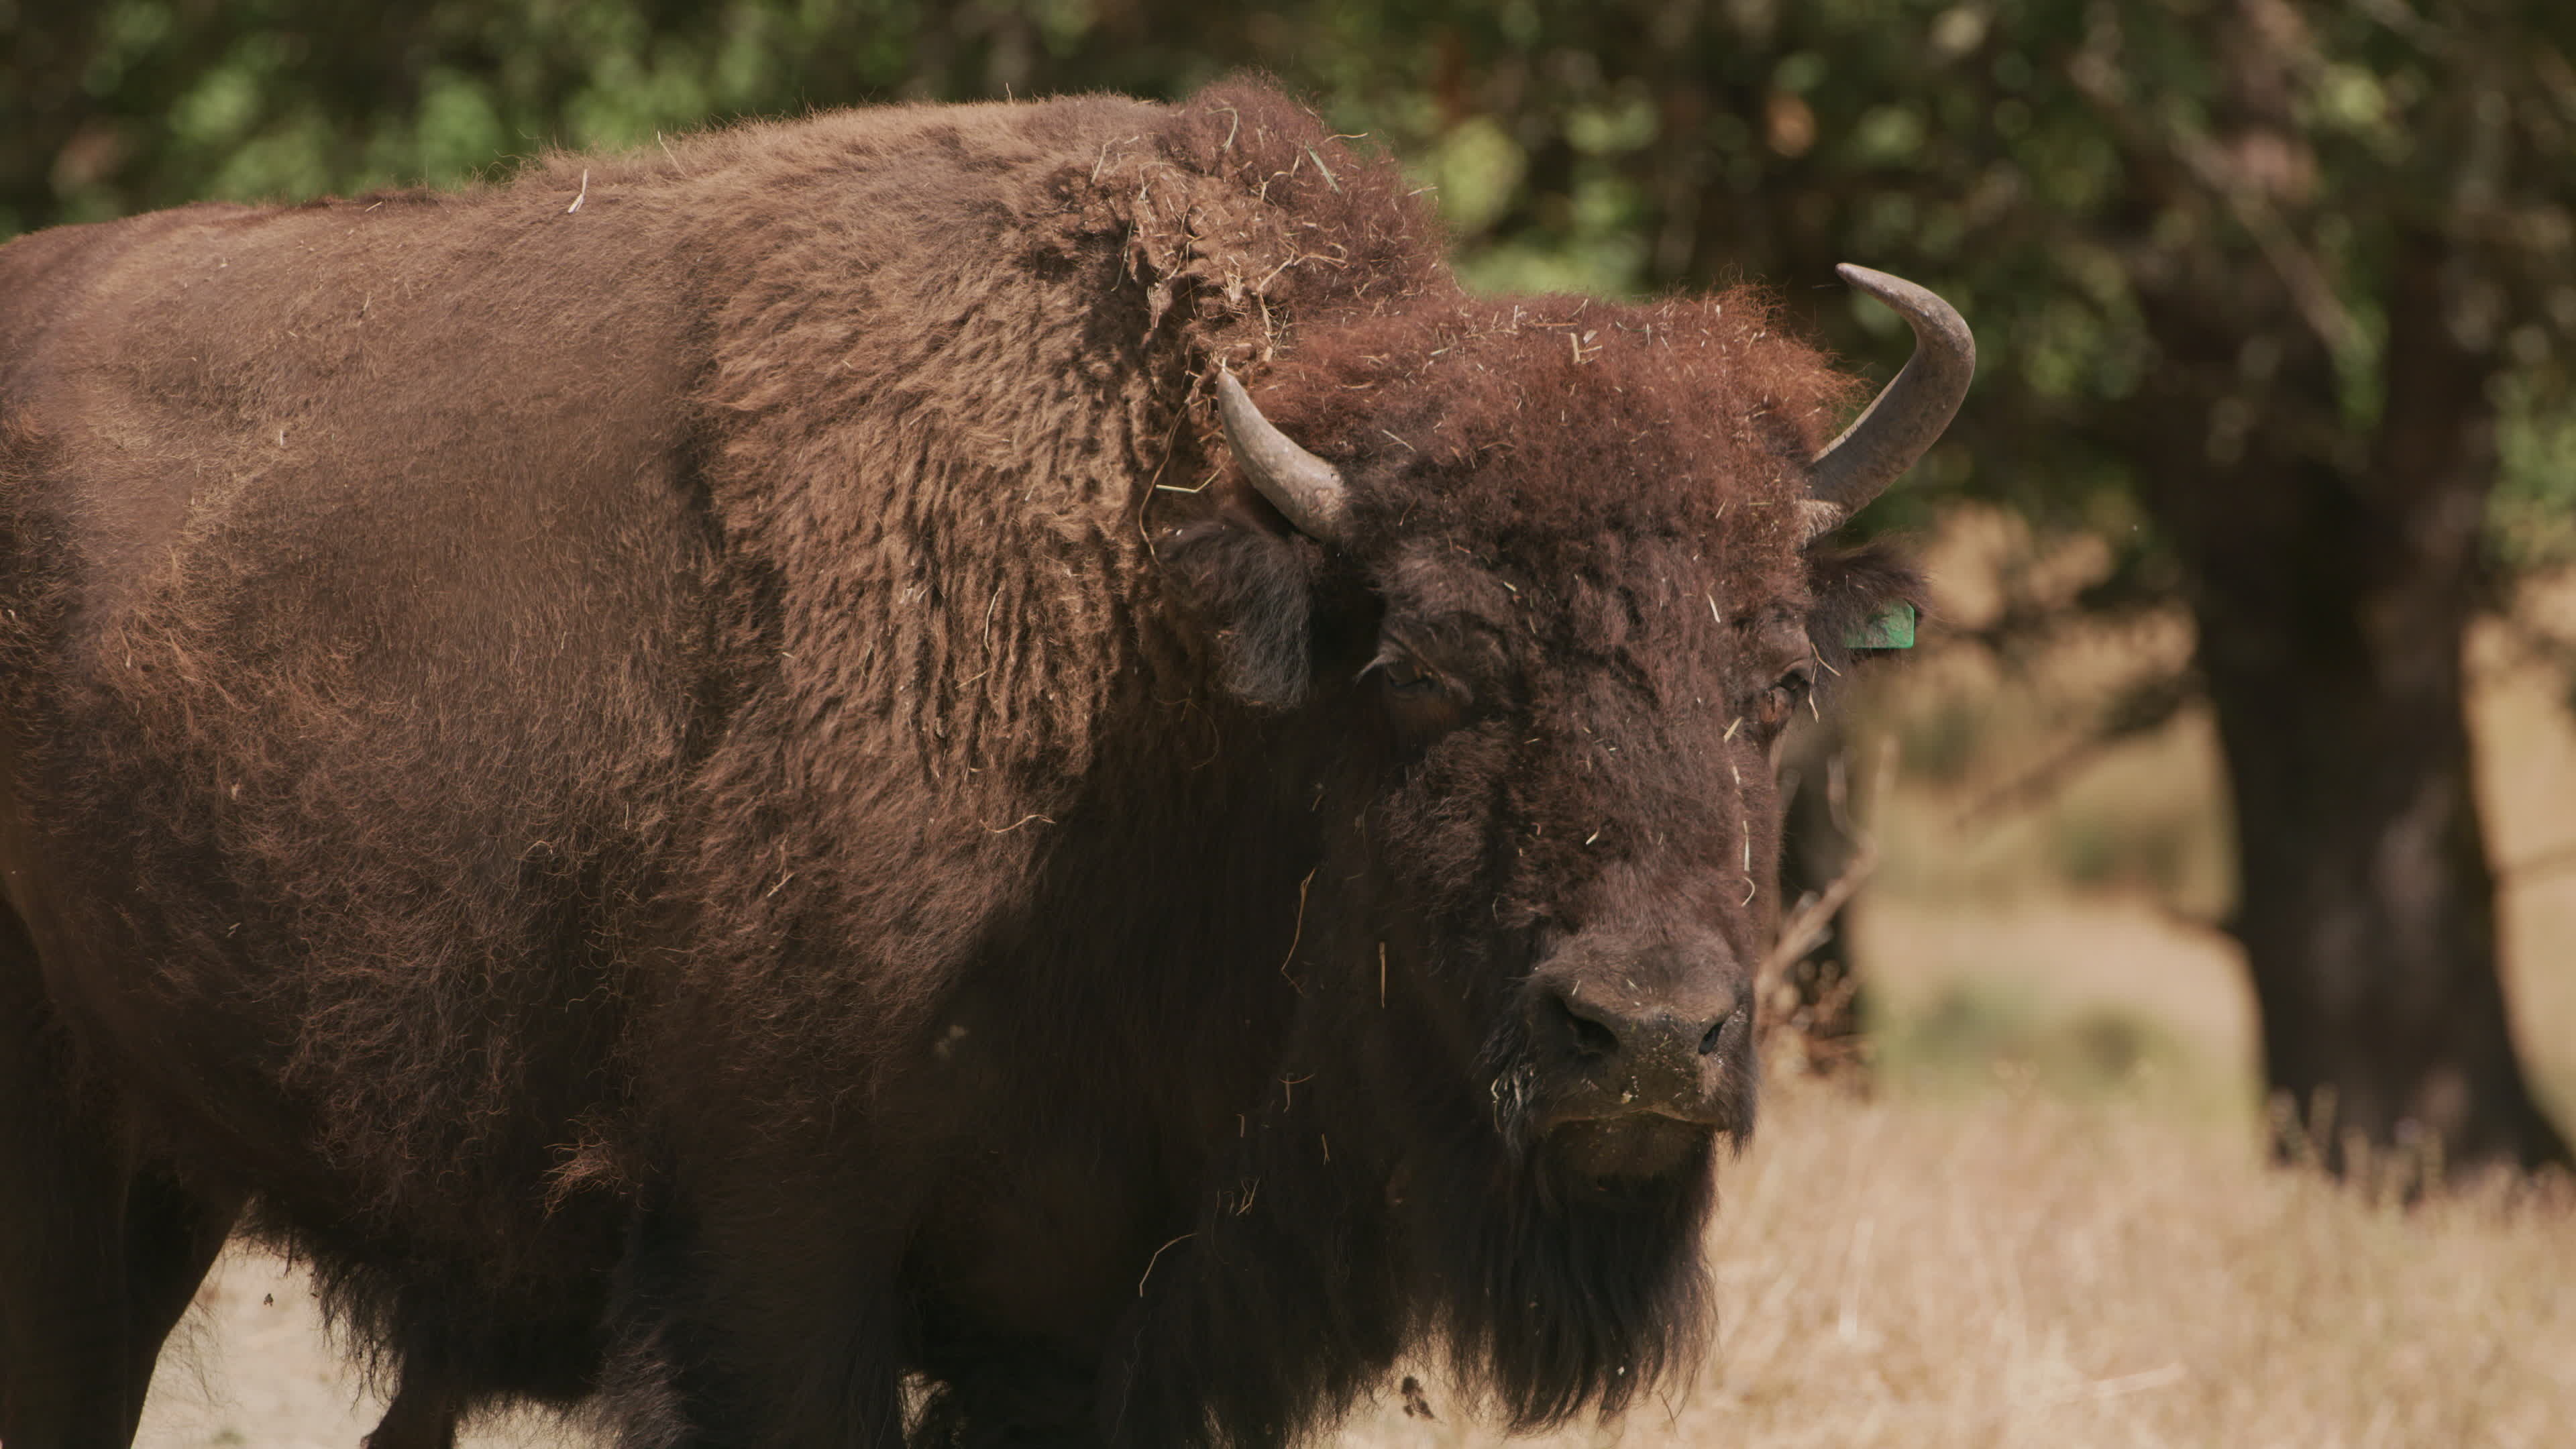 Get up close with American bison, Fascinating bison footage, Bison in the wild, Buffalo in their natural habitat, 3840x2160 4K Desktop